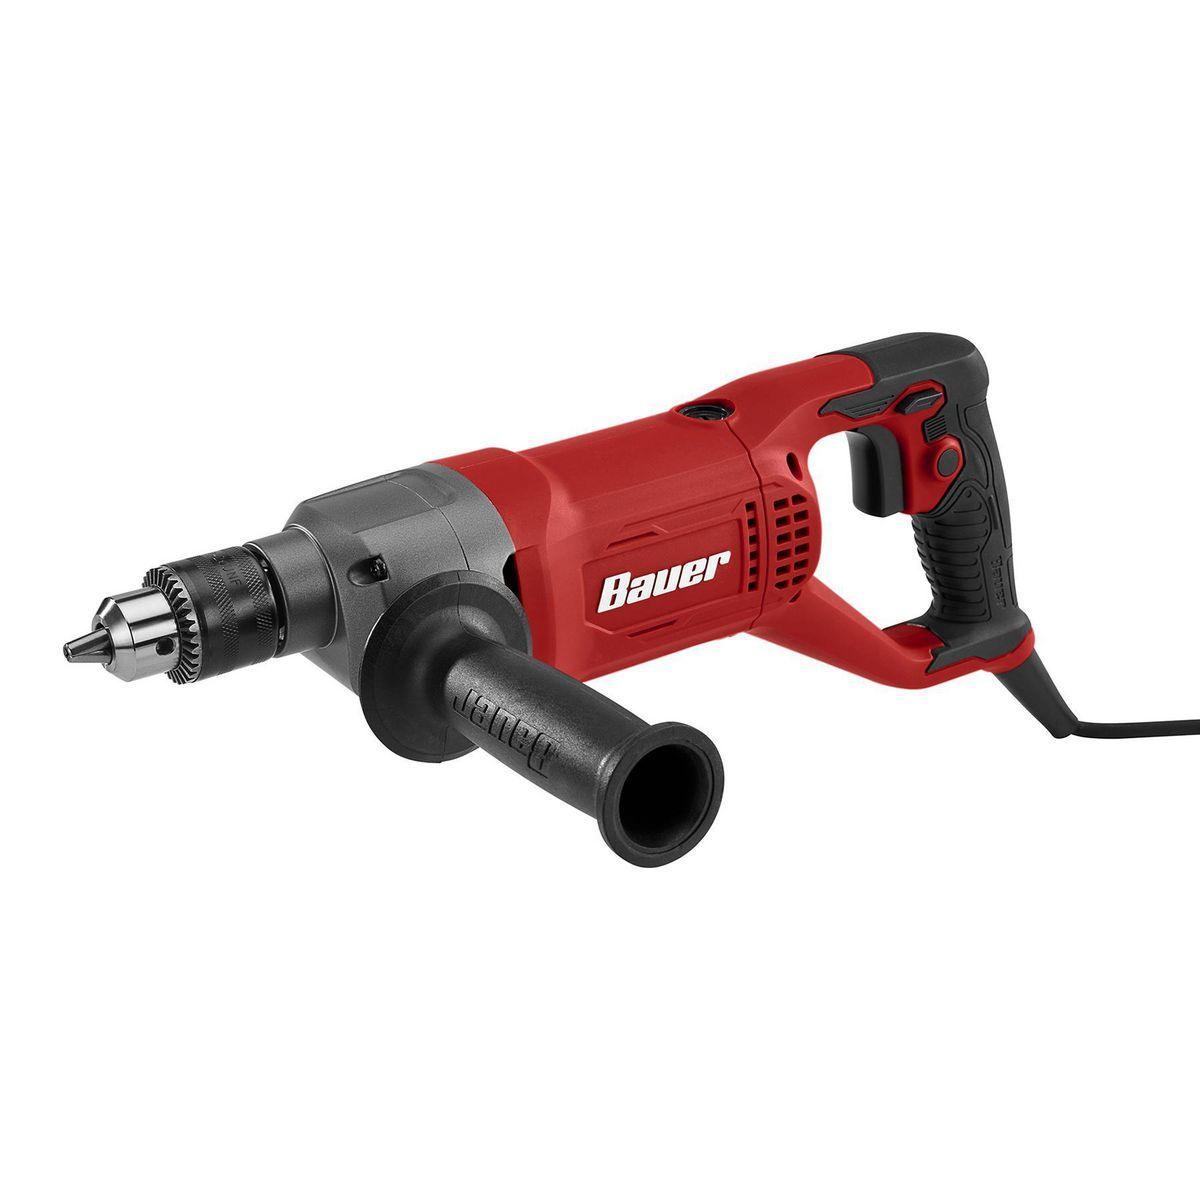 BAUER 9 Amp, 1/2 in. Variable-Speed D-Handle Drill